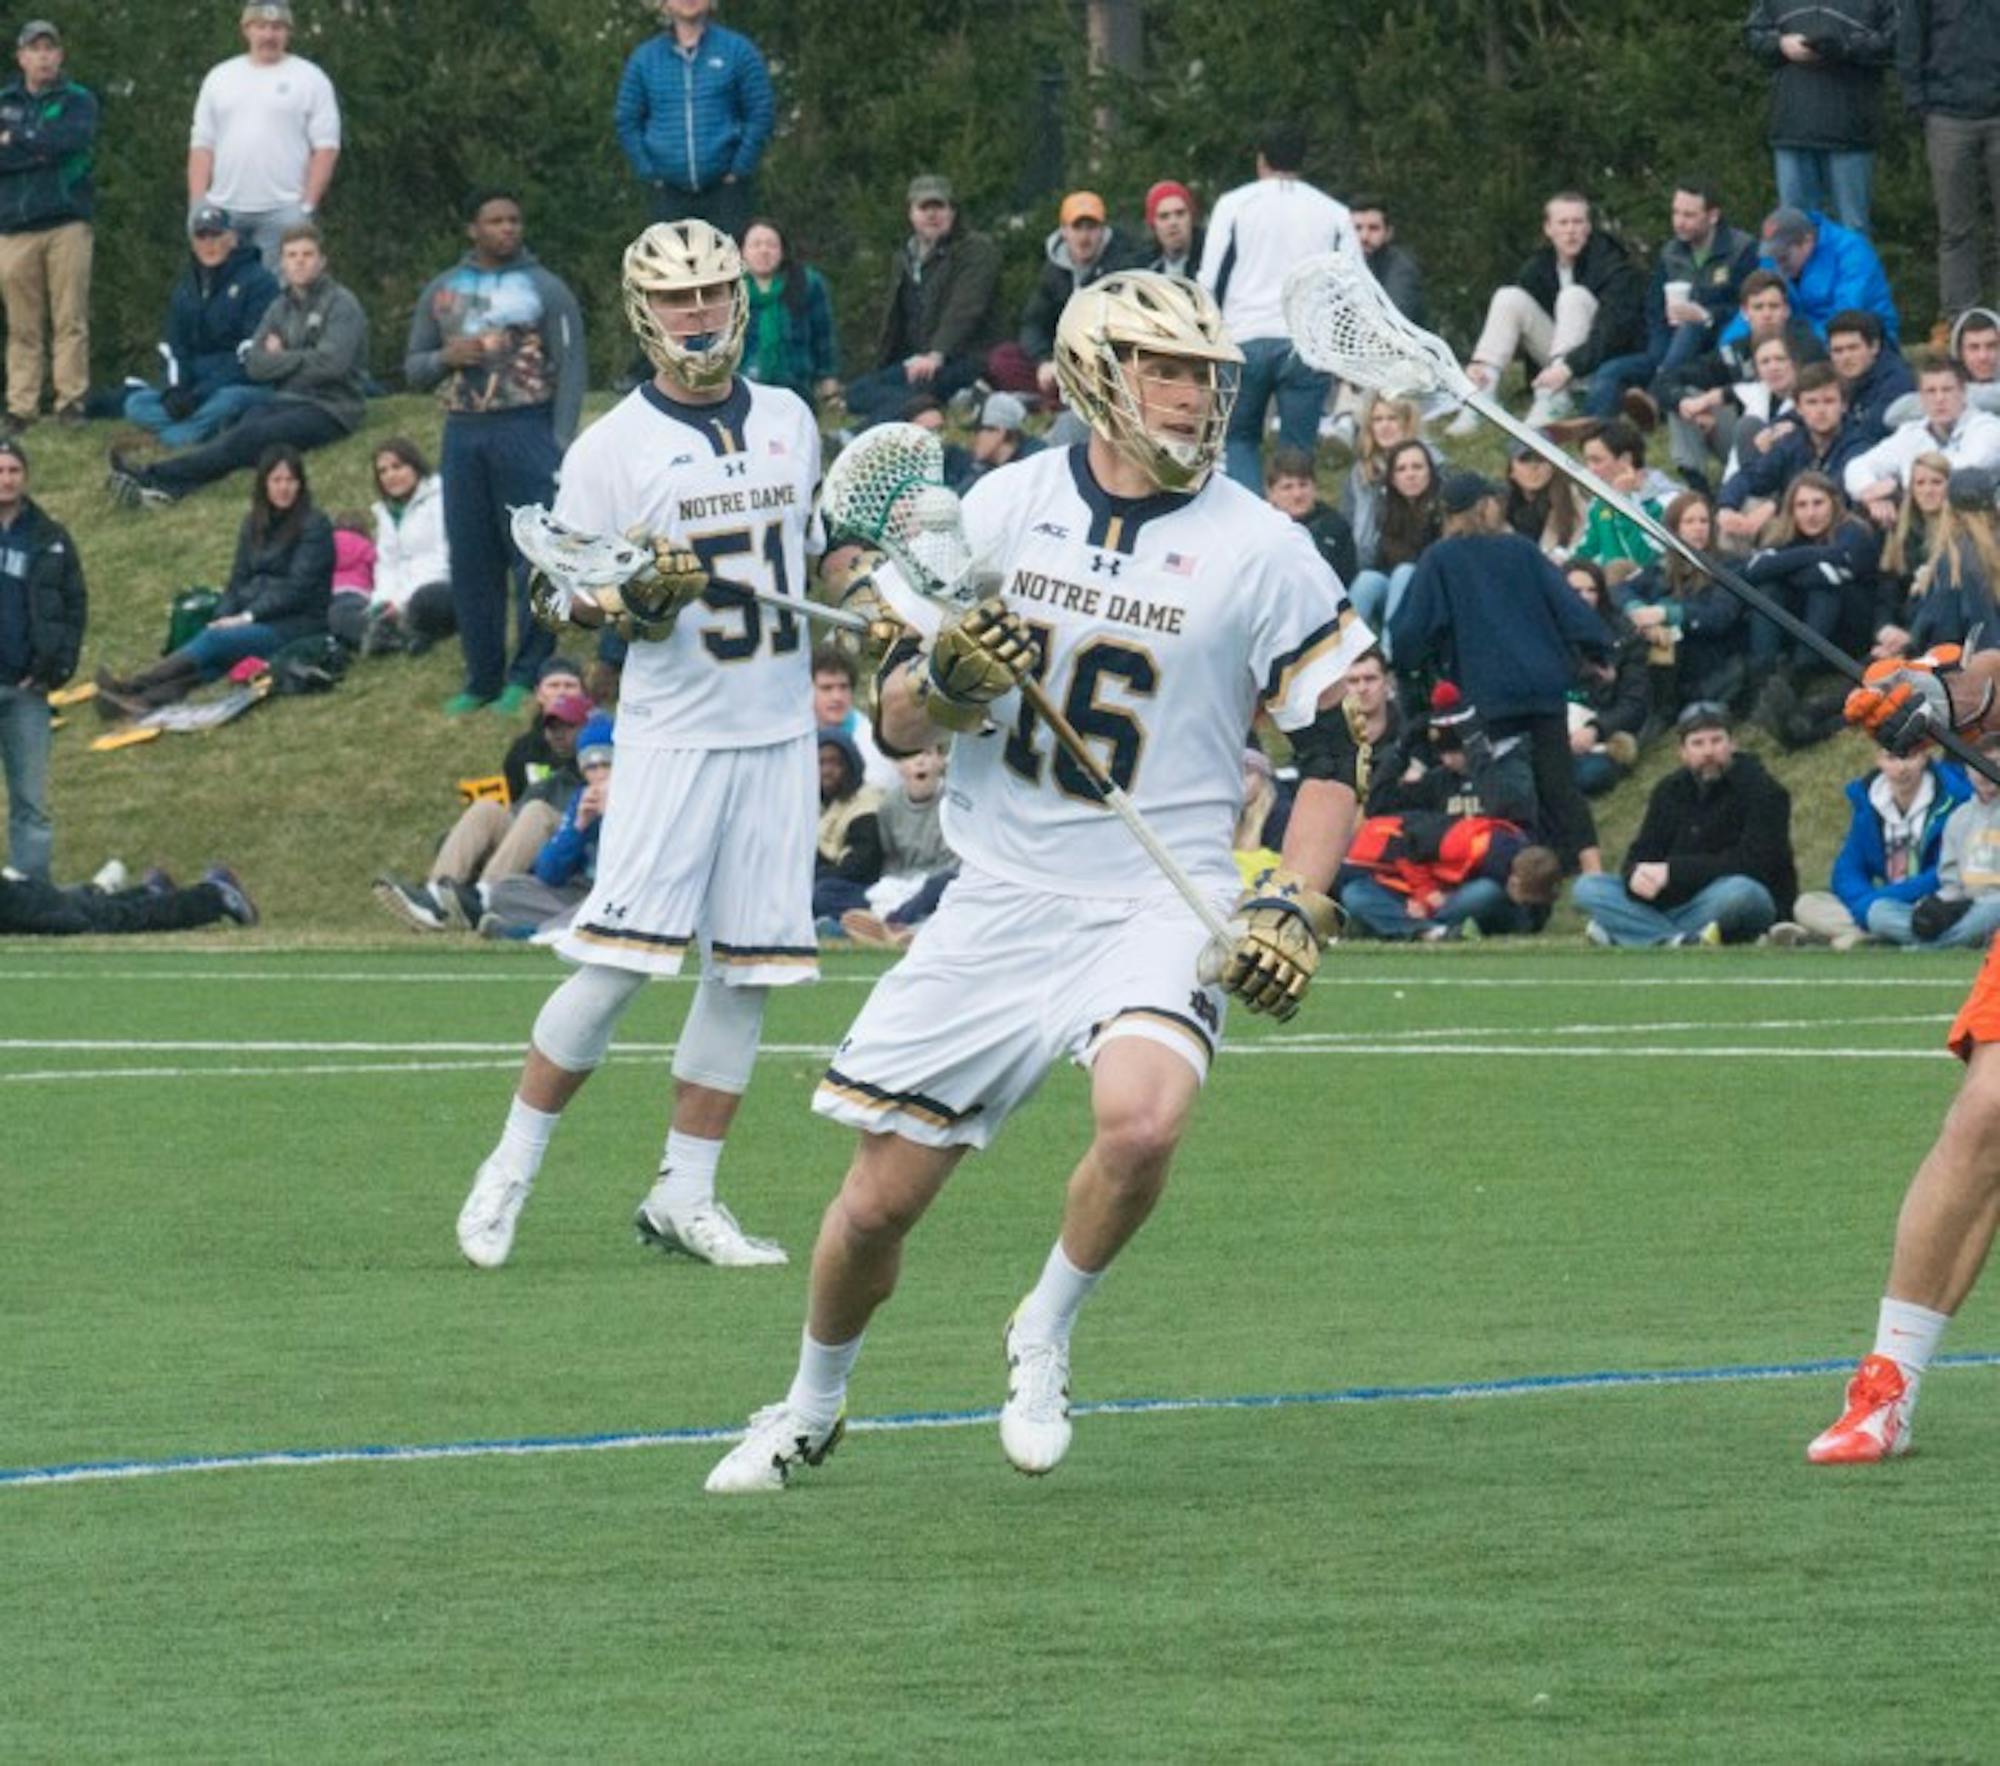 Irish junior midfielder Sergio Perkovic looks to pass the ball during Notre Dame’s 8-7 victory in overtime against Virginia on March 19 at Arlotta Field. Perkovic had three goals during the game.